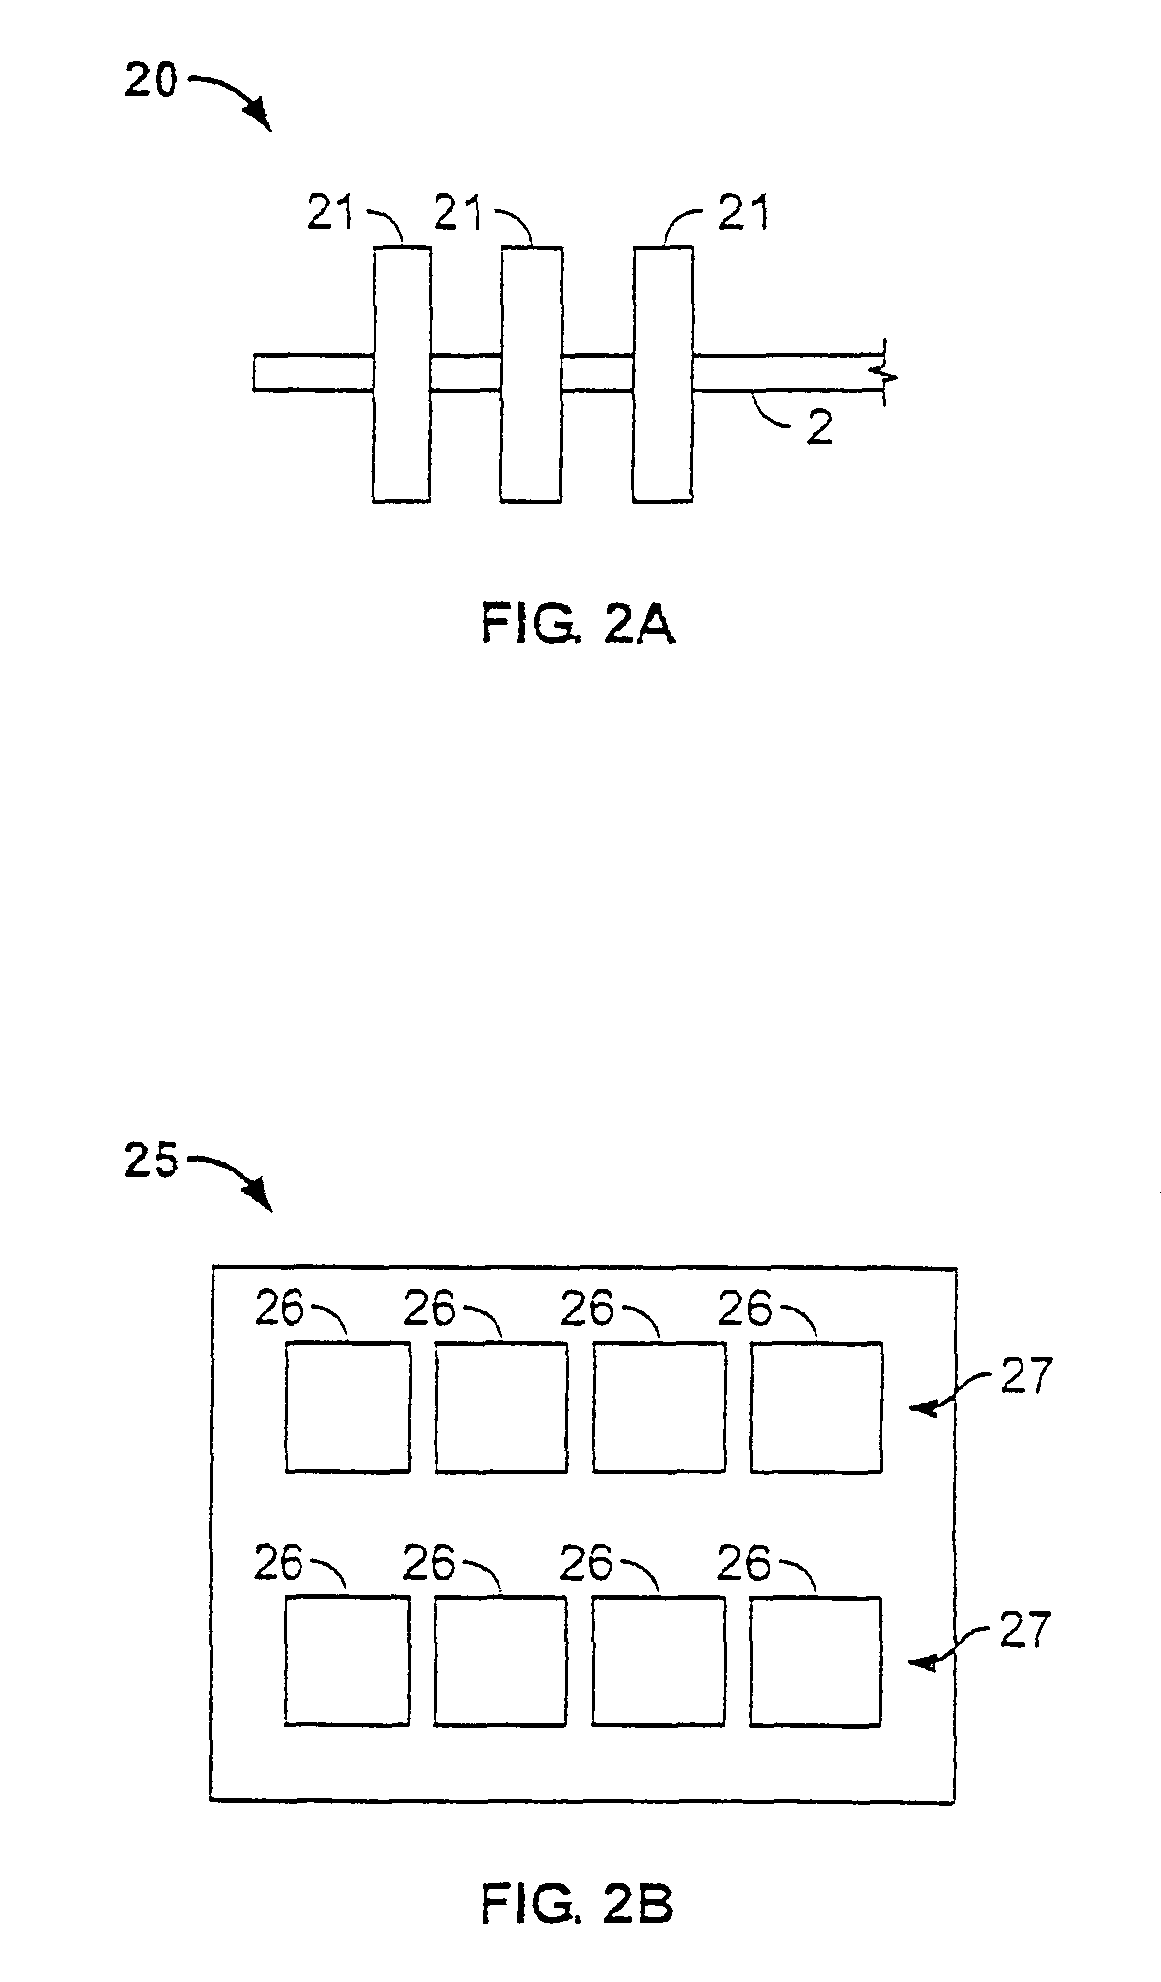 Method and apparatus for interference suppression in orthogonal frequency division multiplexed (OFDM) wireless communication systems